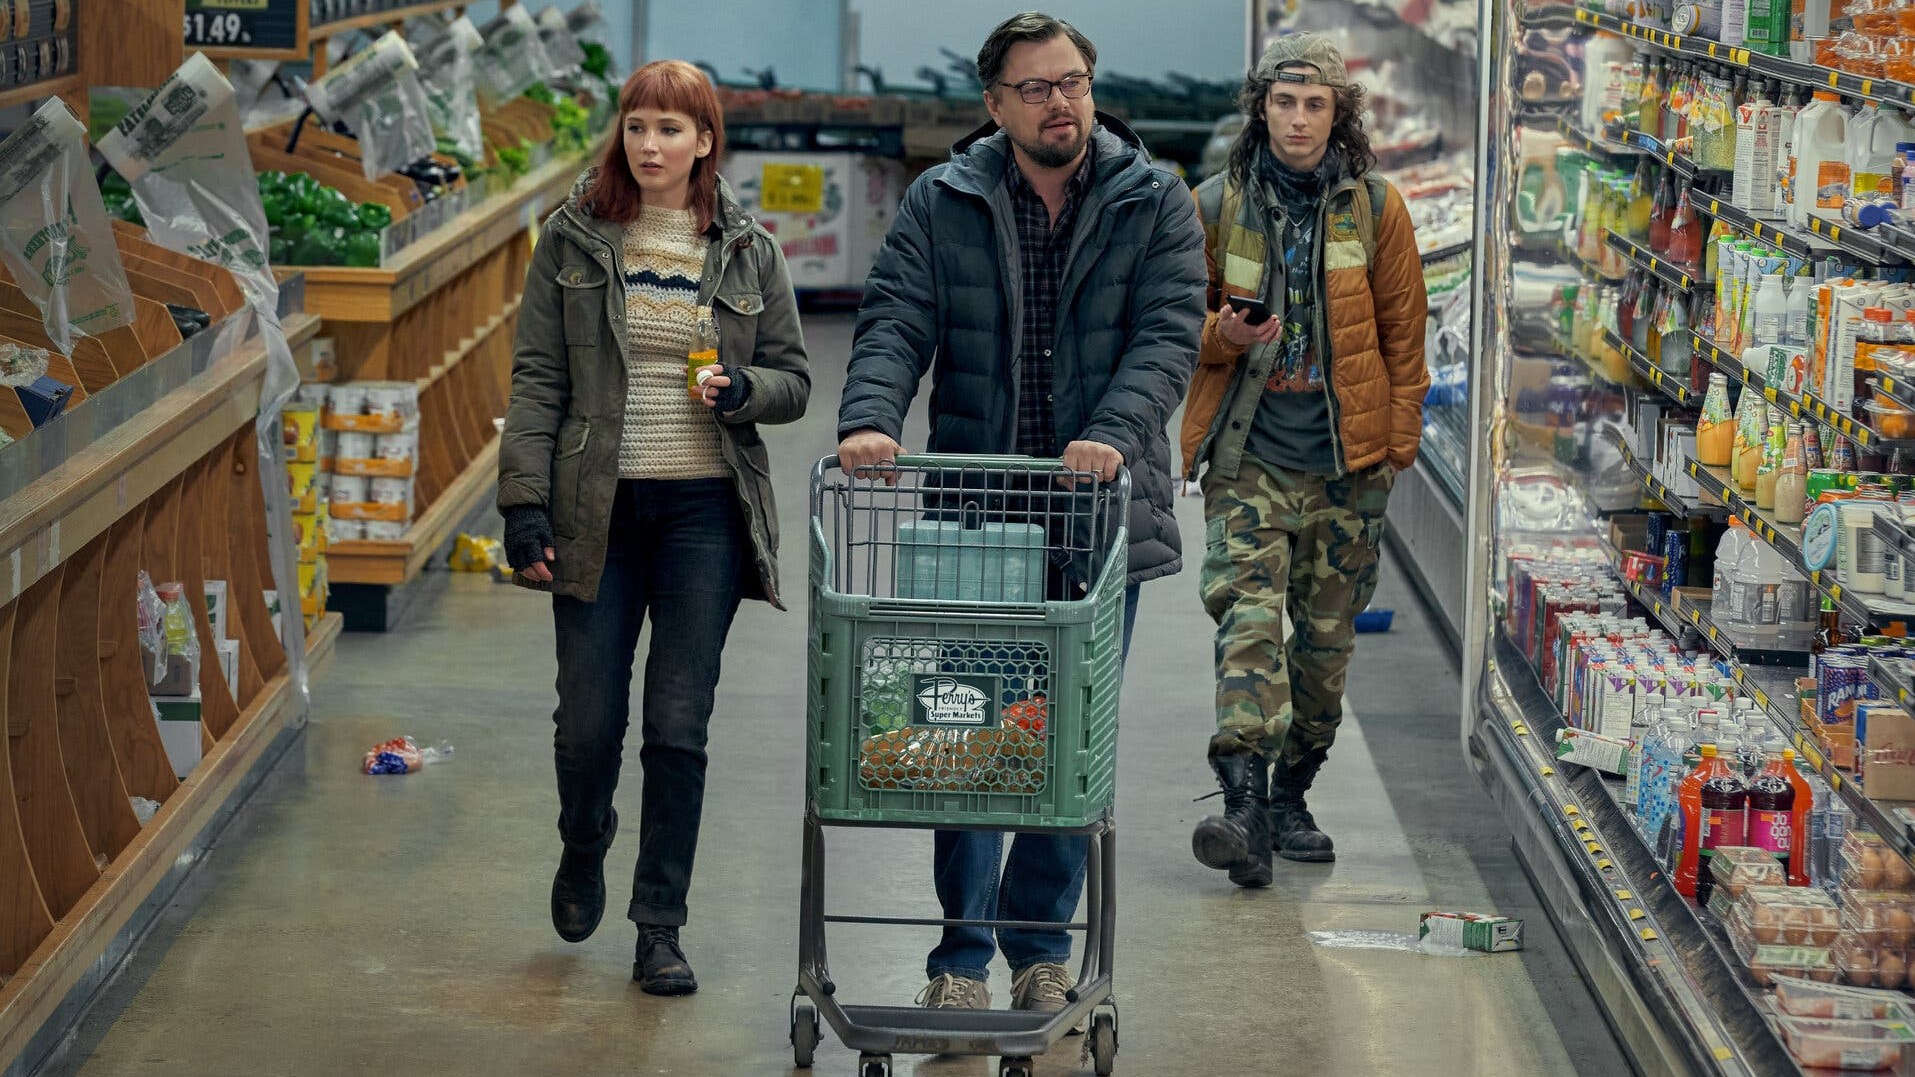 scene from Don't Look Up of three people walking through a grocery store